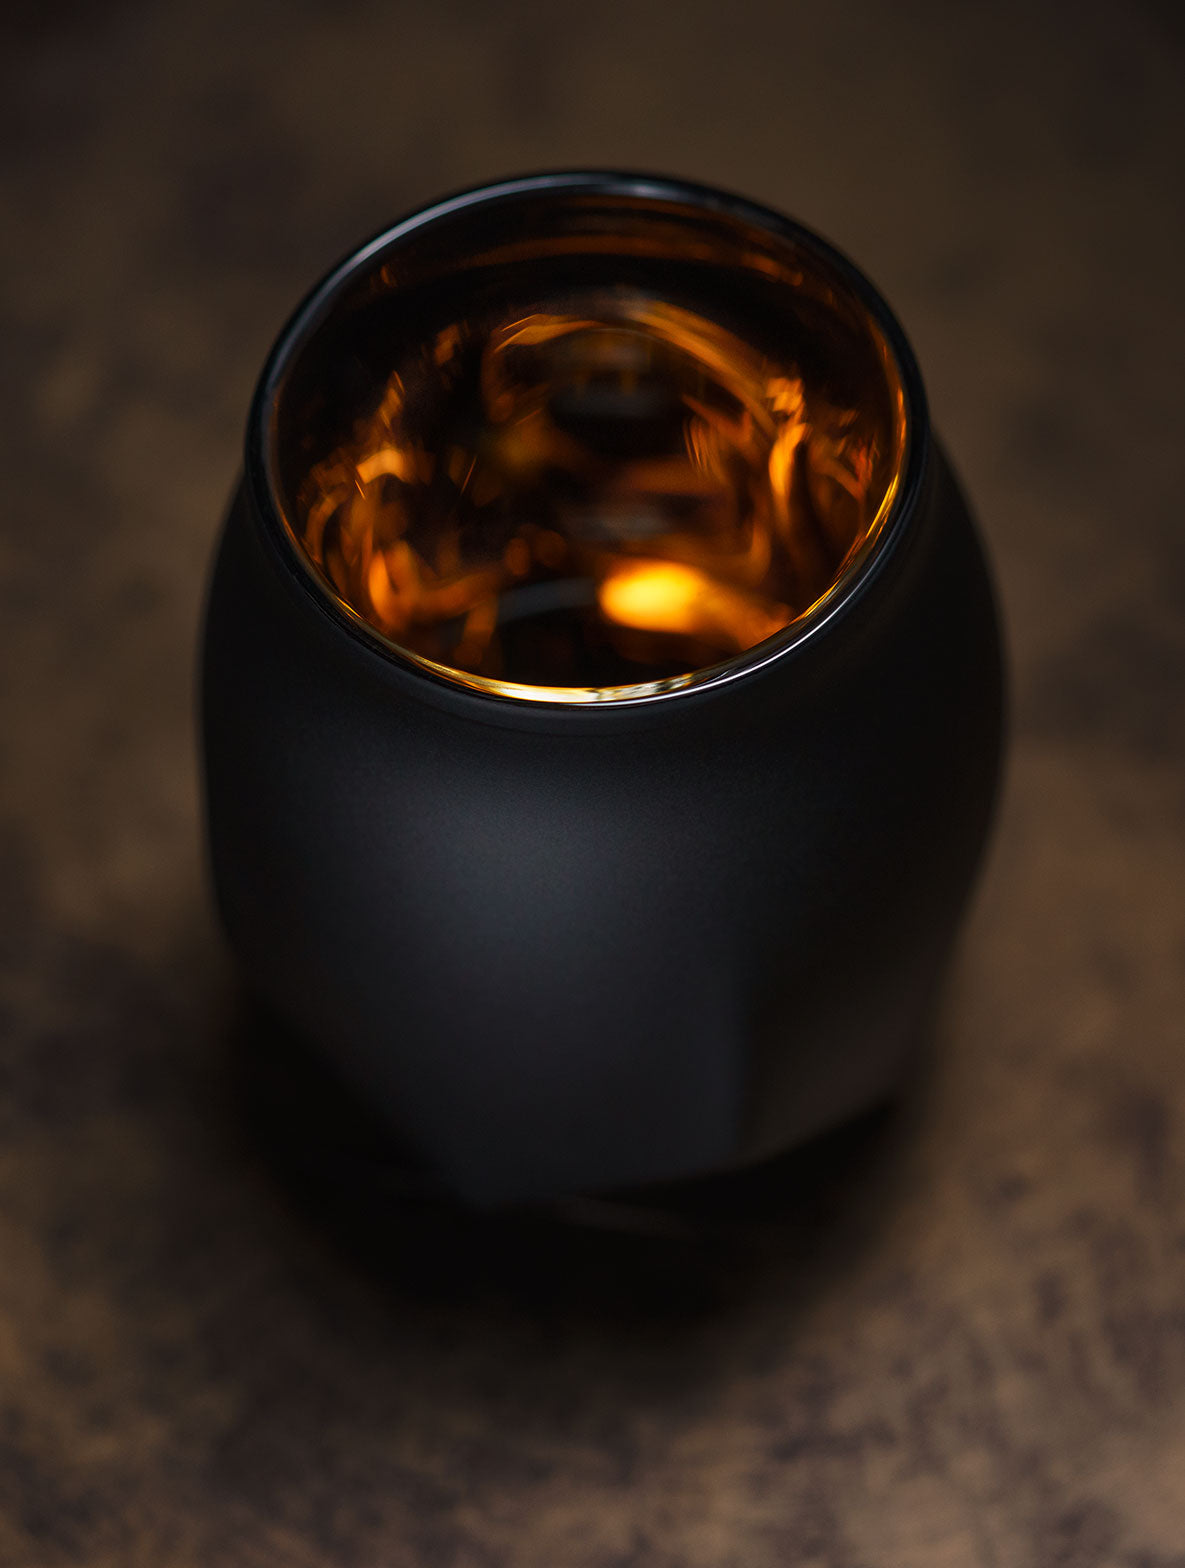 Black edition of the Norlan Whisky Glass viewed from slightly overhead with the deep golden glow of whisky inside. 